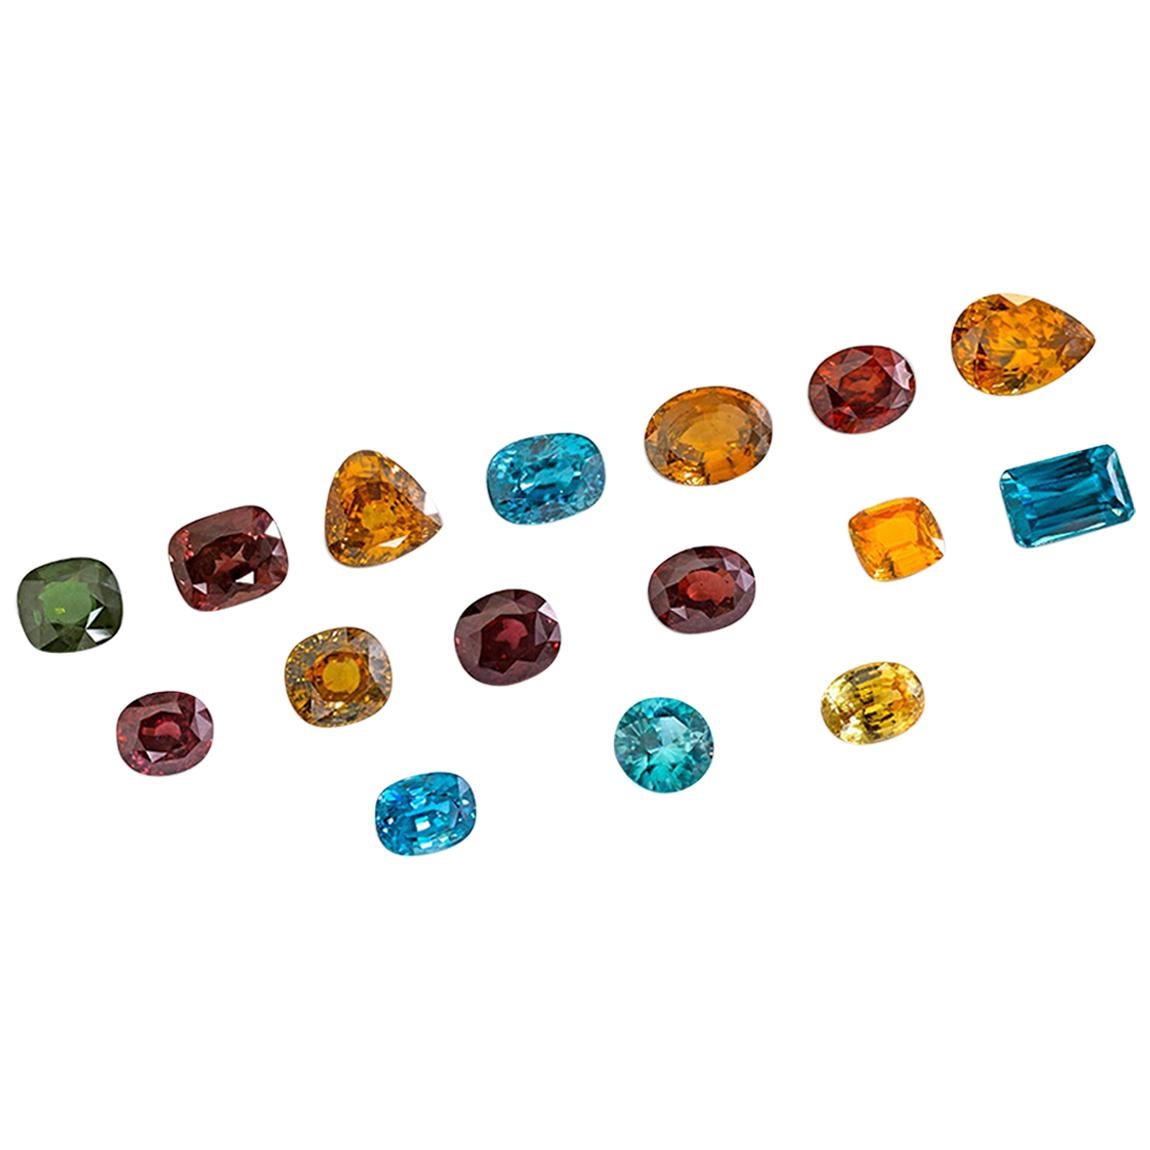 Privately Curated Zircon Collection, Unset Loose Gemstones,  347.05 Carats Total